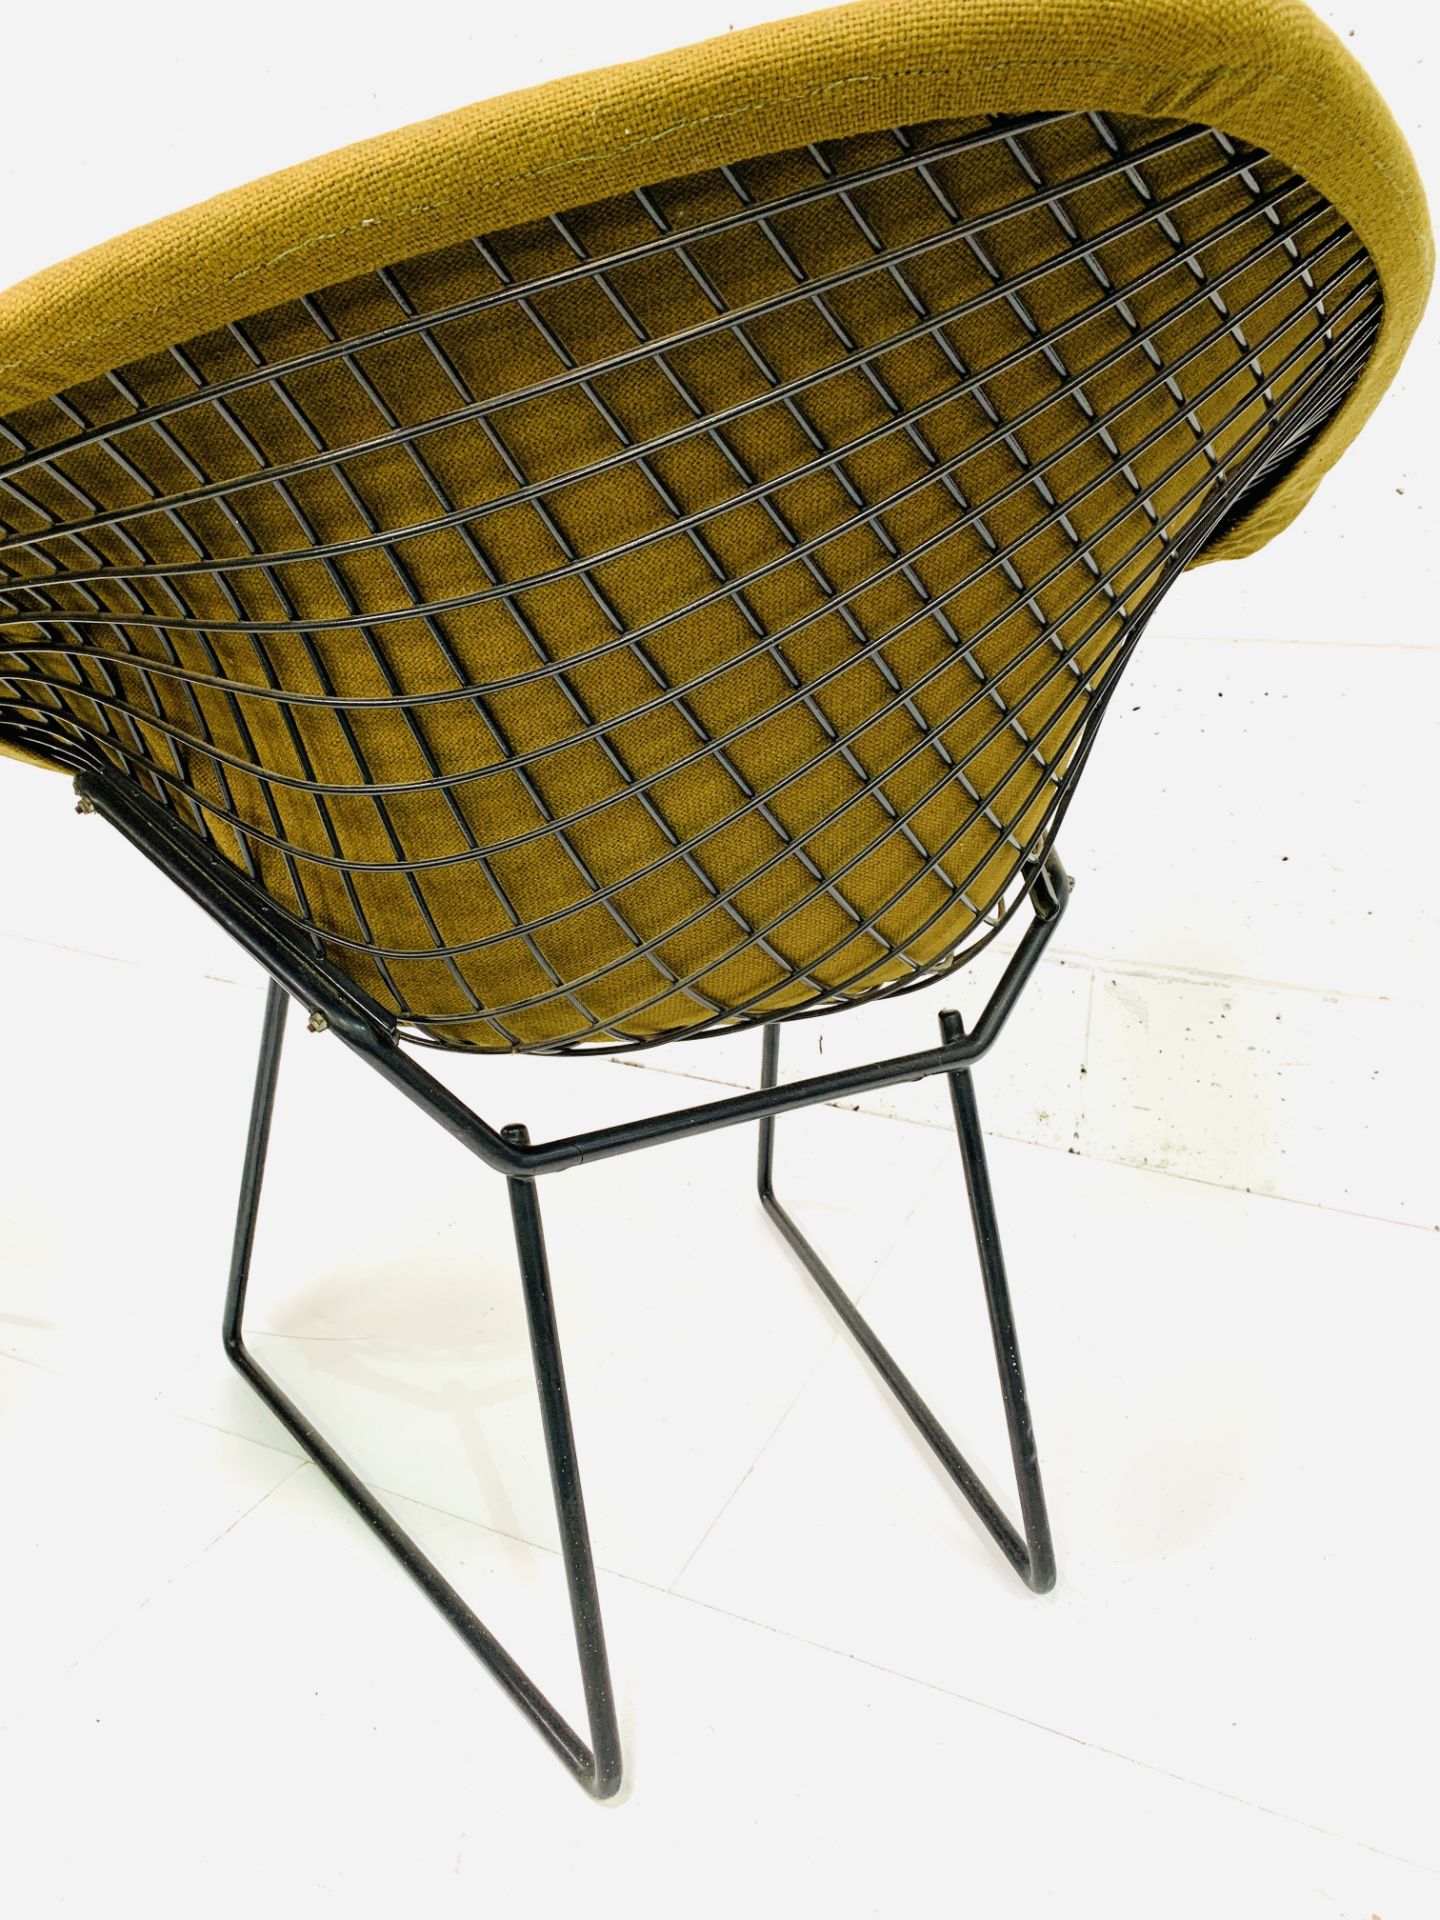 A Harry Bertoia diamond chair with footstool - Image 5 of 5